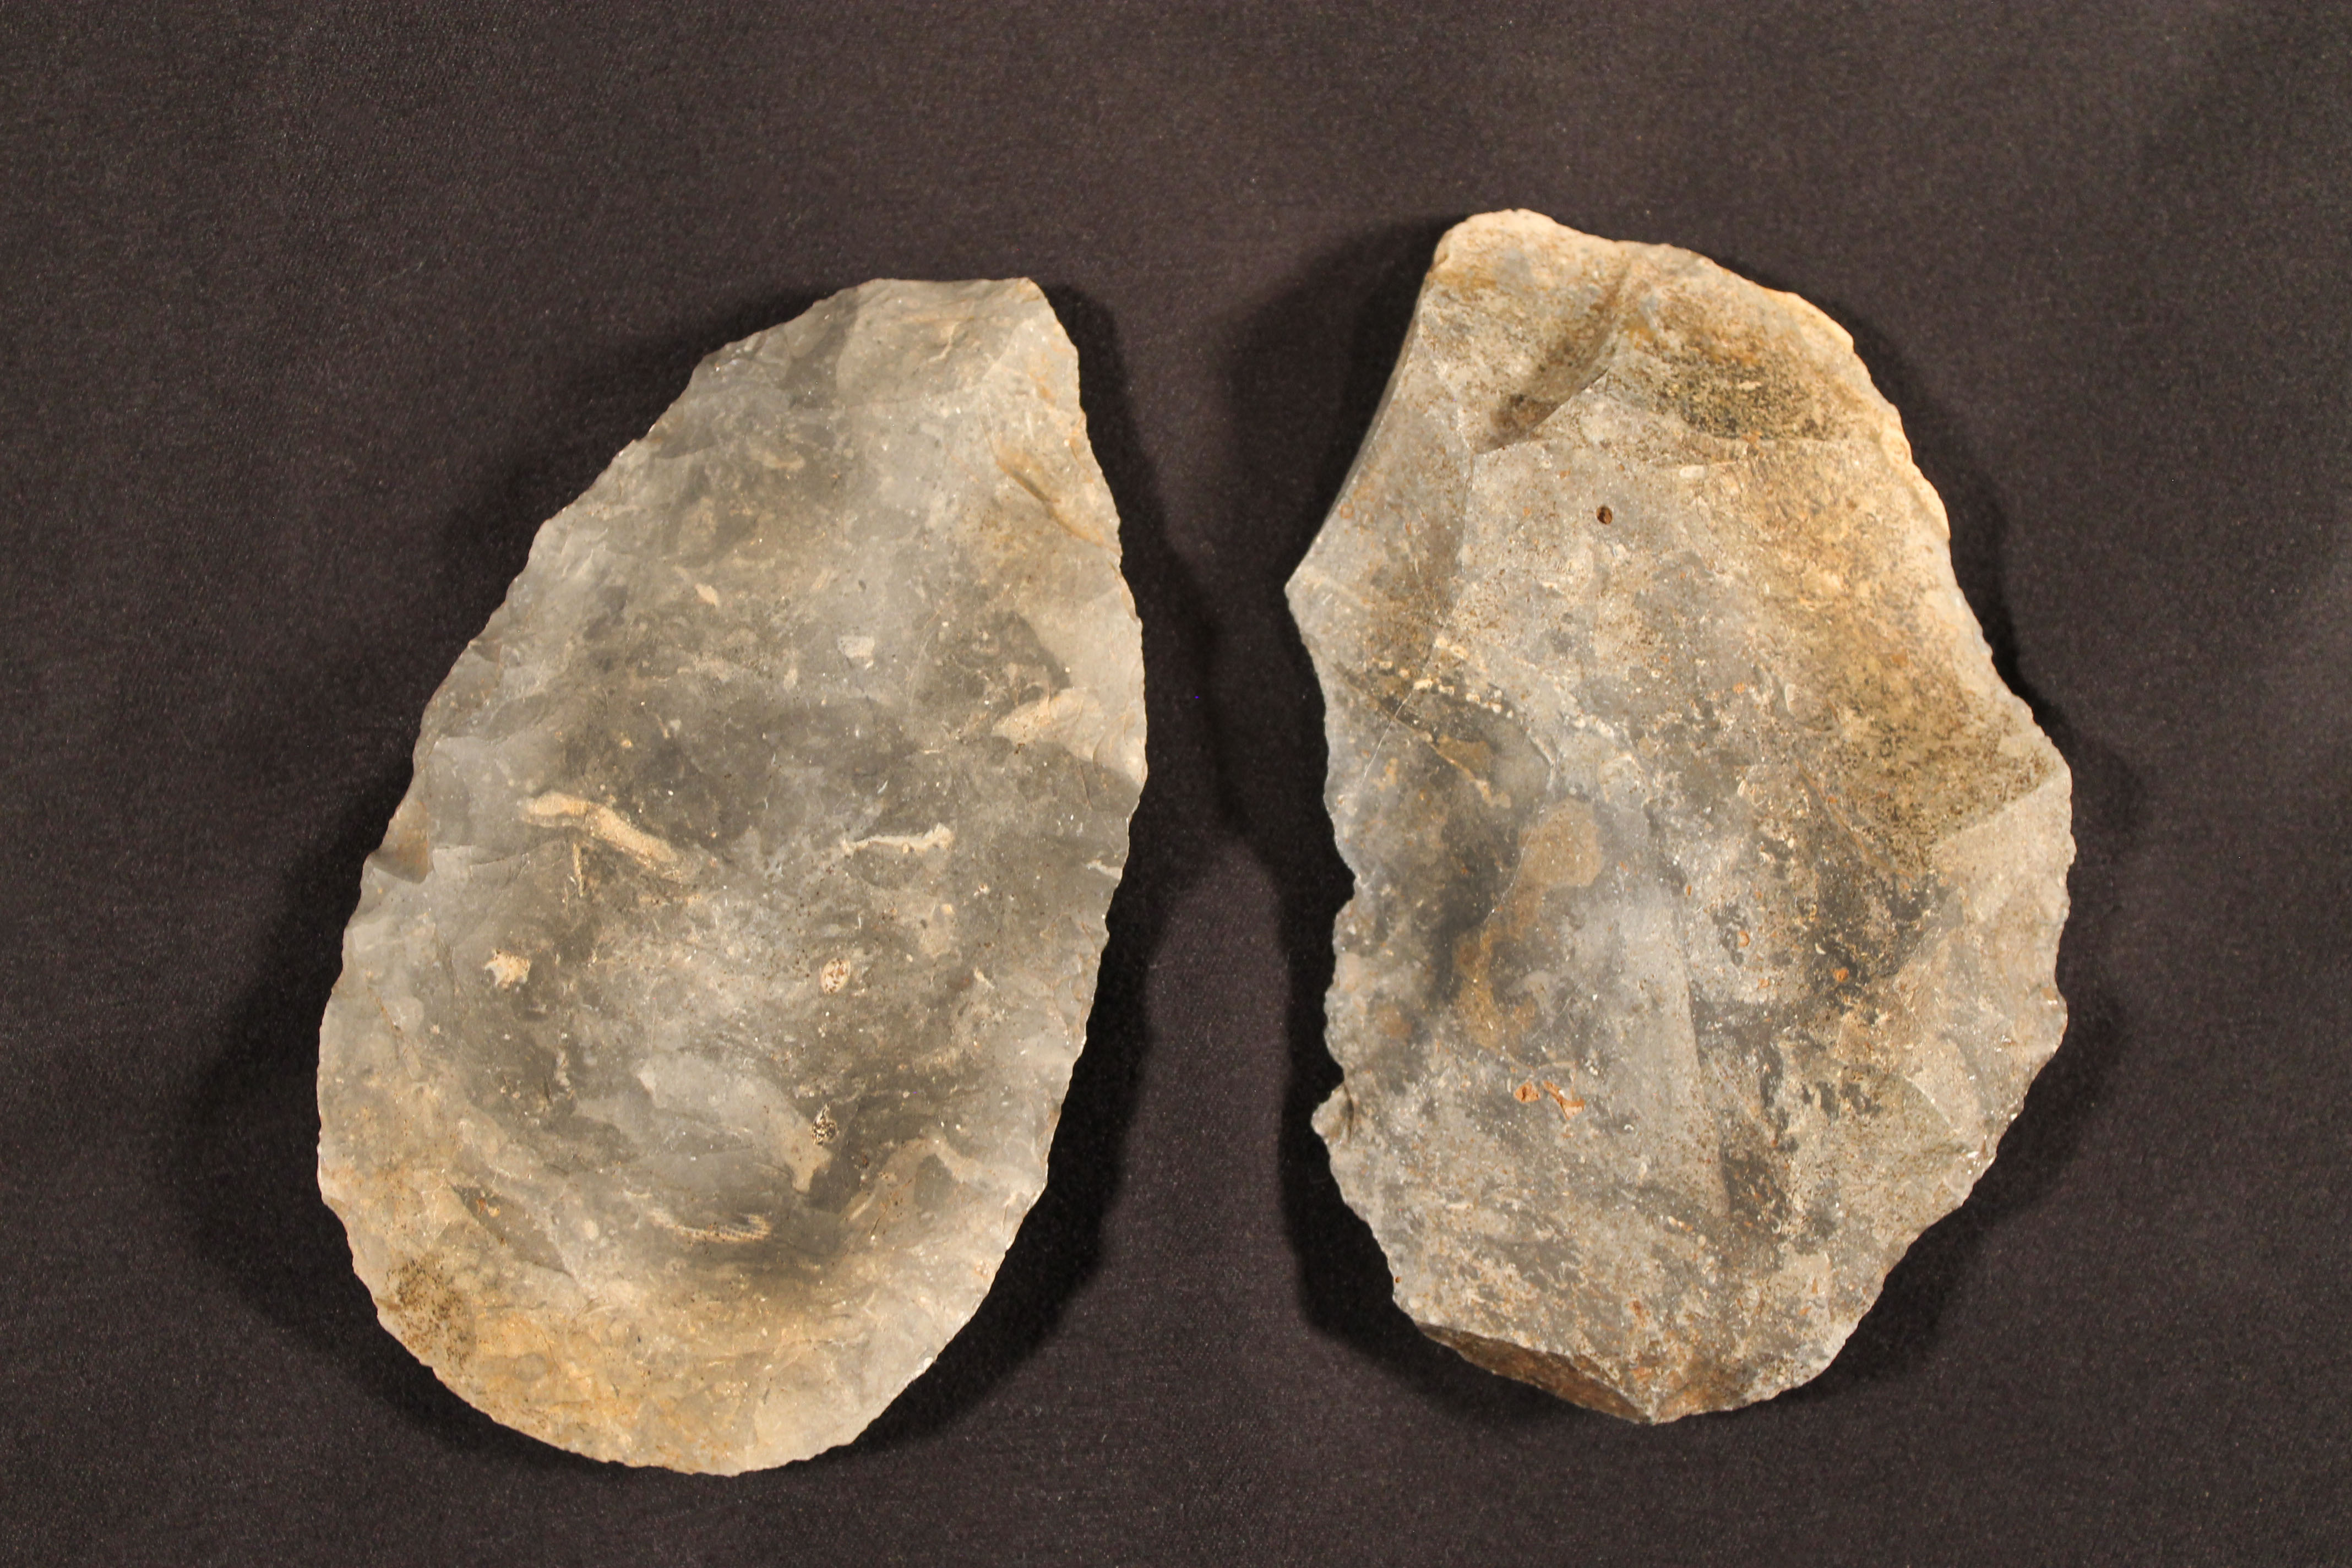 Two oval-shaped stone tools with markings on their surfaces